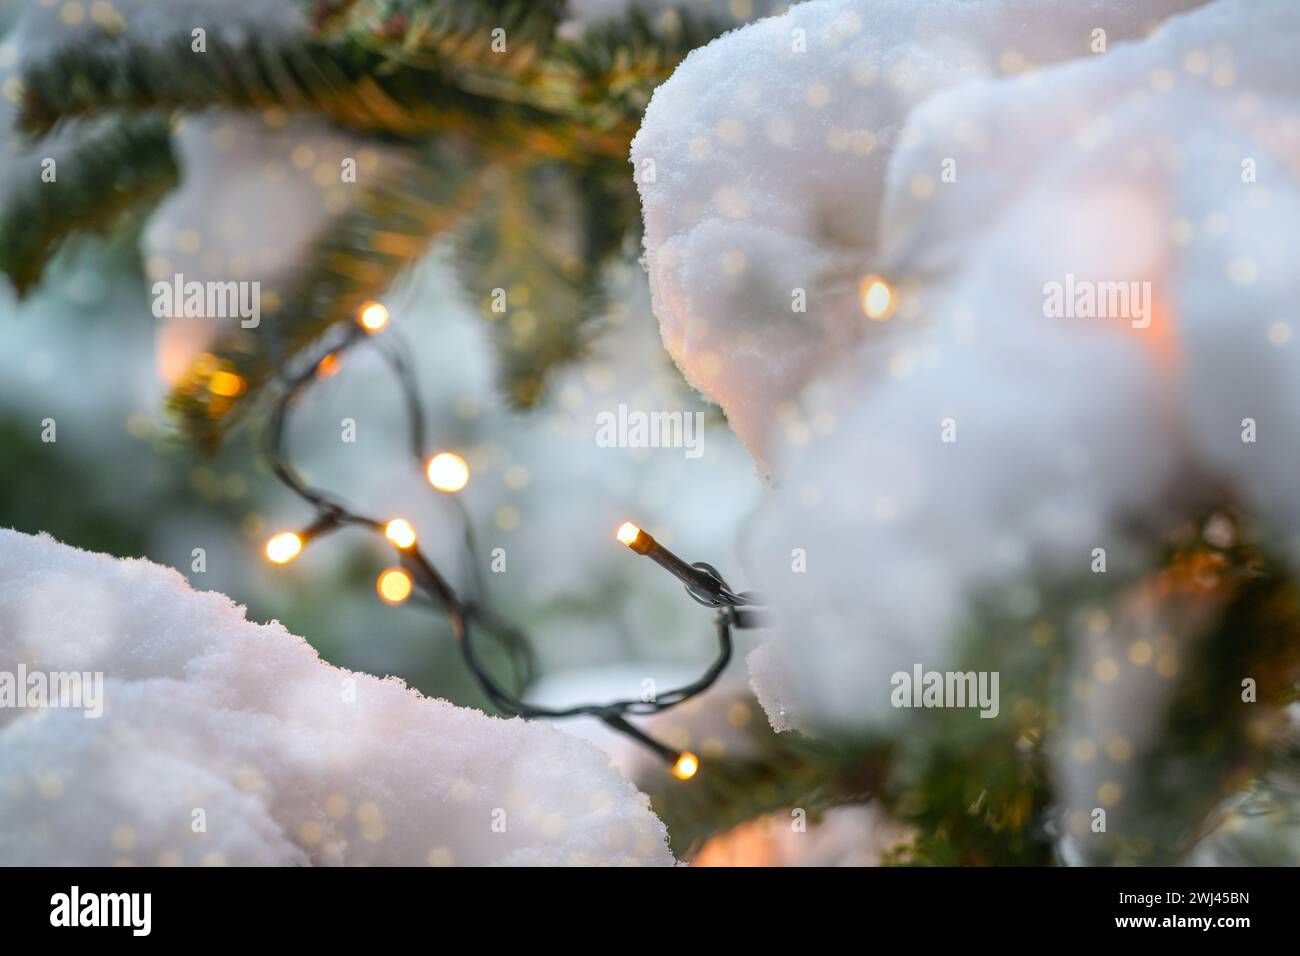 Fairy lights in a snow-covered Christmas tree in the winter garden or park, seasonal holiday decoration, copy space, selected fo Stock Photo